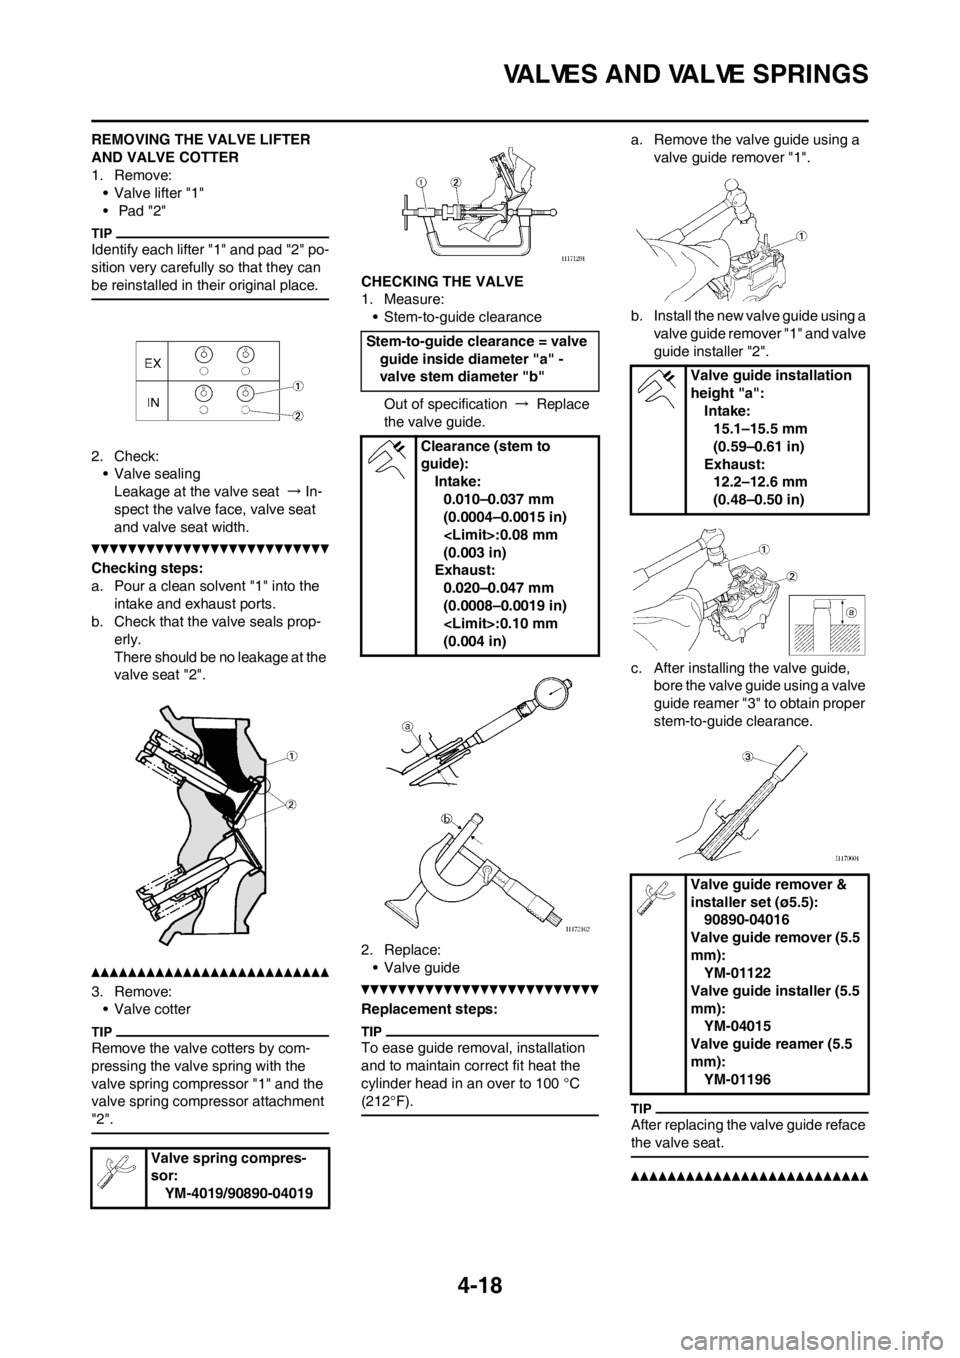 YAMAHA YZ450F 2012  Owners Manual 4-18
VALVES AND VALVE SPRINGS
REMOVING THE VALVE LIFTER 
AND VALVE COTTER
1. Remove:
• Valve lifter "1"
•  Pad "2"
Identify each lifter "1" and pad "2" po-
sition very carefully so that they can 
